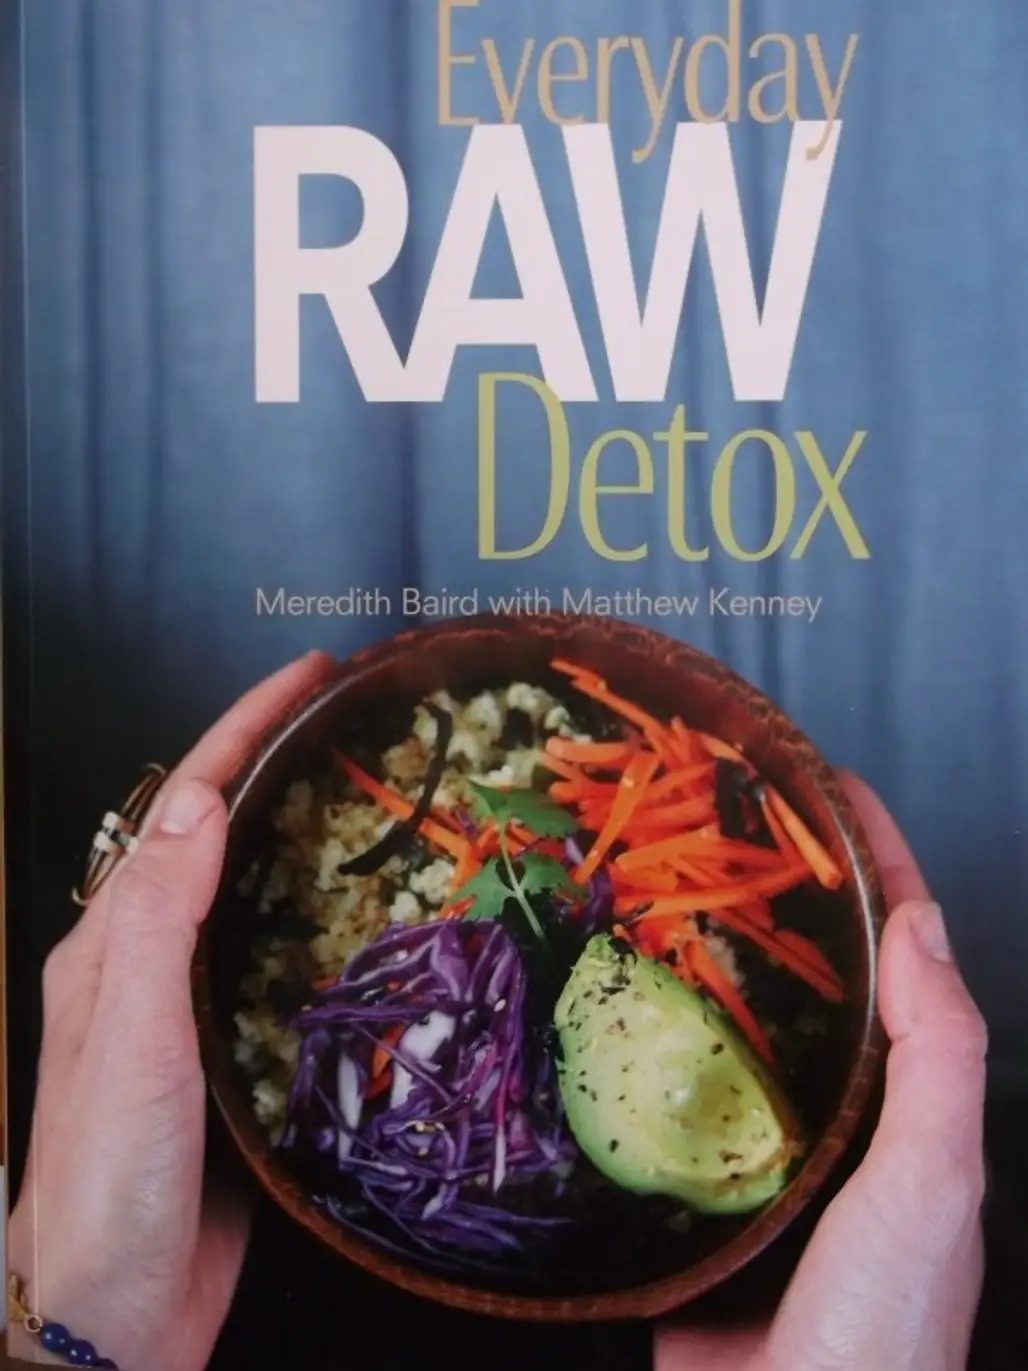 Everyday Raw Detox by Meredith Baird and Matthew Kenney